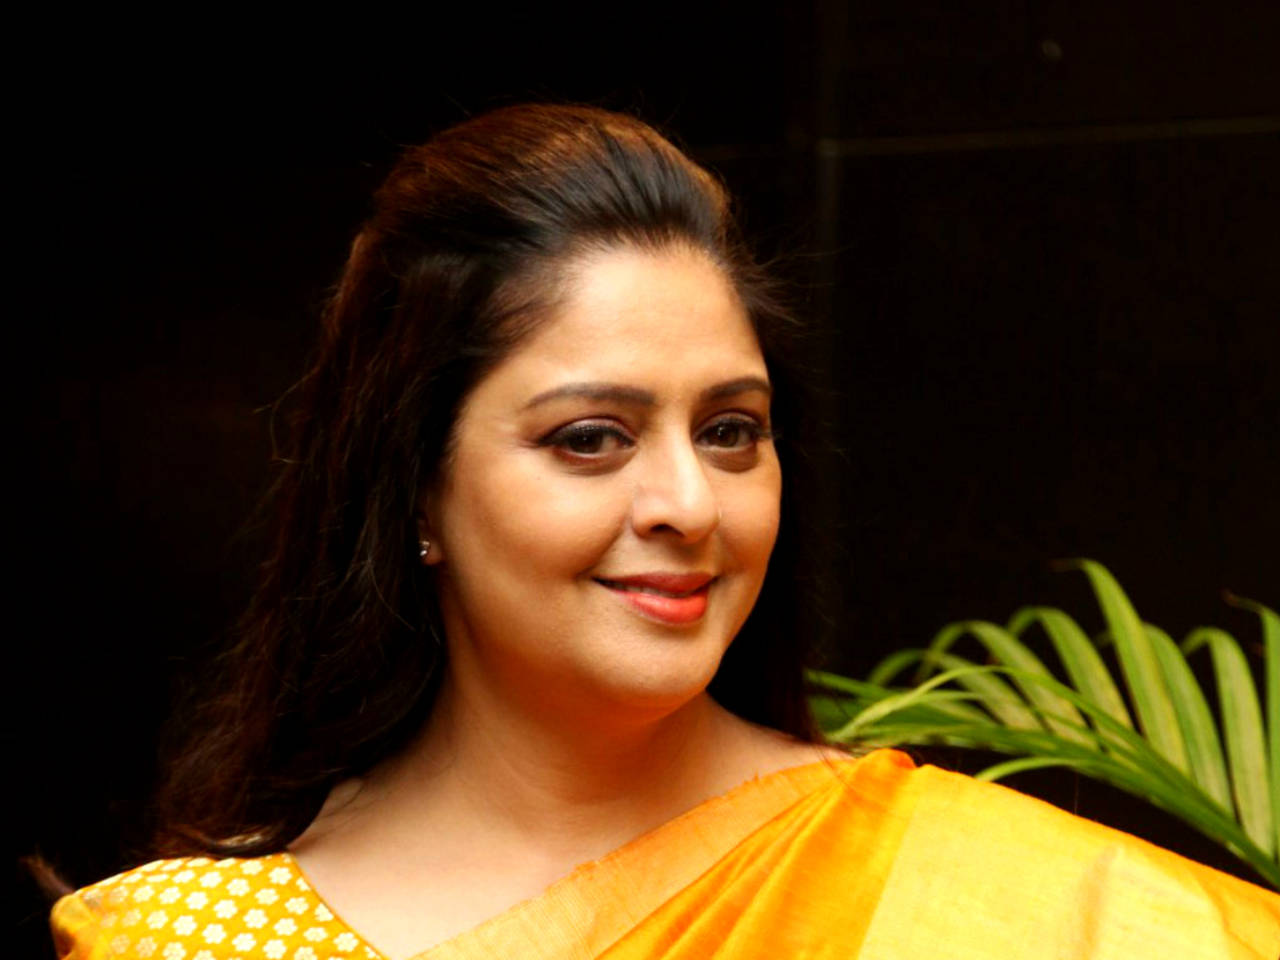 Nagma tests positive for COVID-19 days after her first shot of vaccine Tamil Movie News